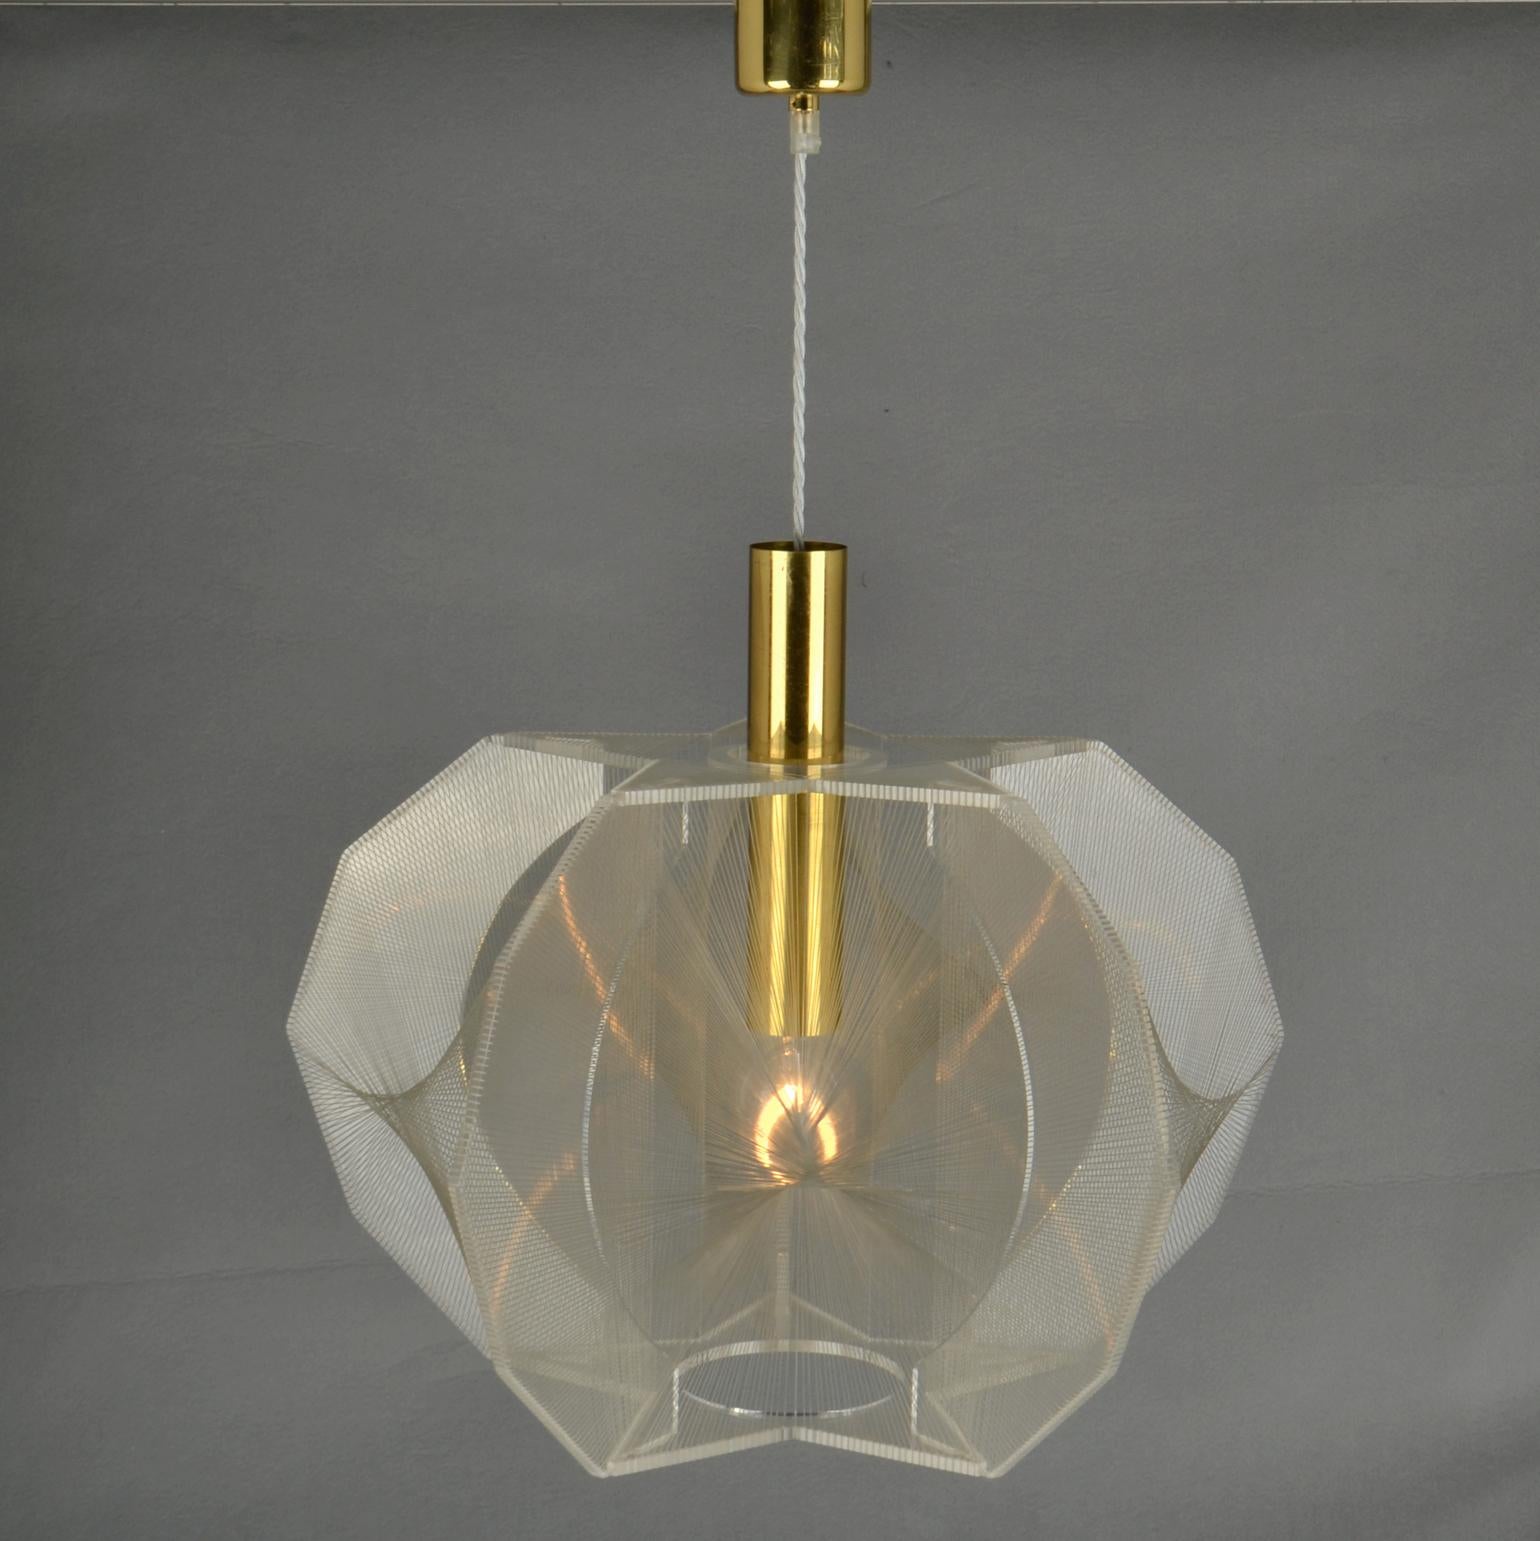 Sculptural lamp in star shape formation of clear acrylic / Perspex and clear transparent wire accompanied brass internal fittings holder. The design is influenced by the pioneer, Avant Garde artist and sculptor Naum Gabo (1890–1977). 
These lamps